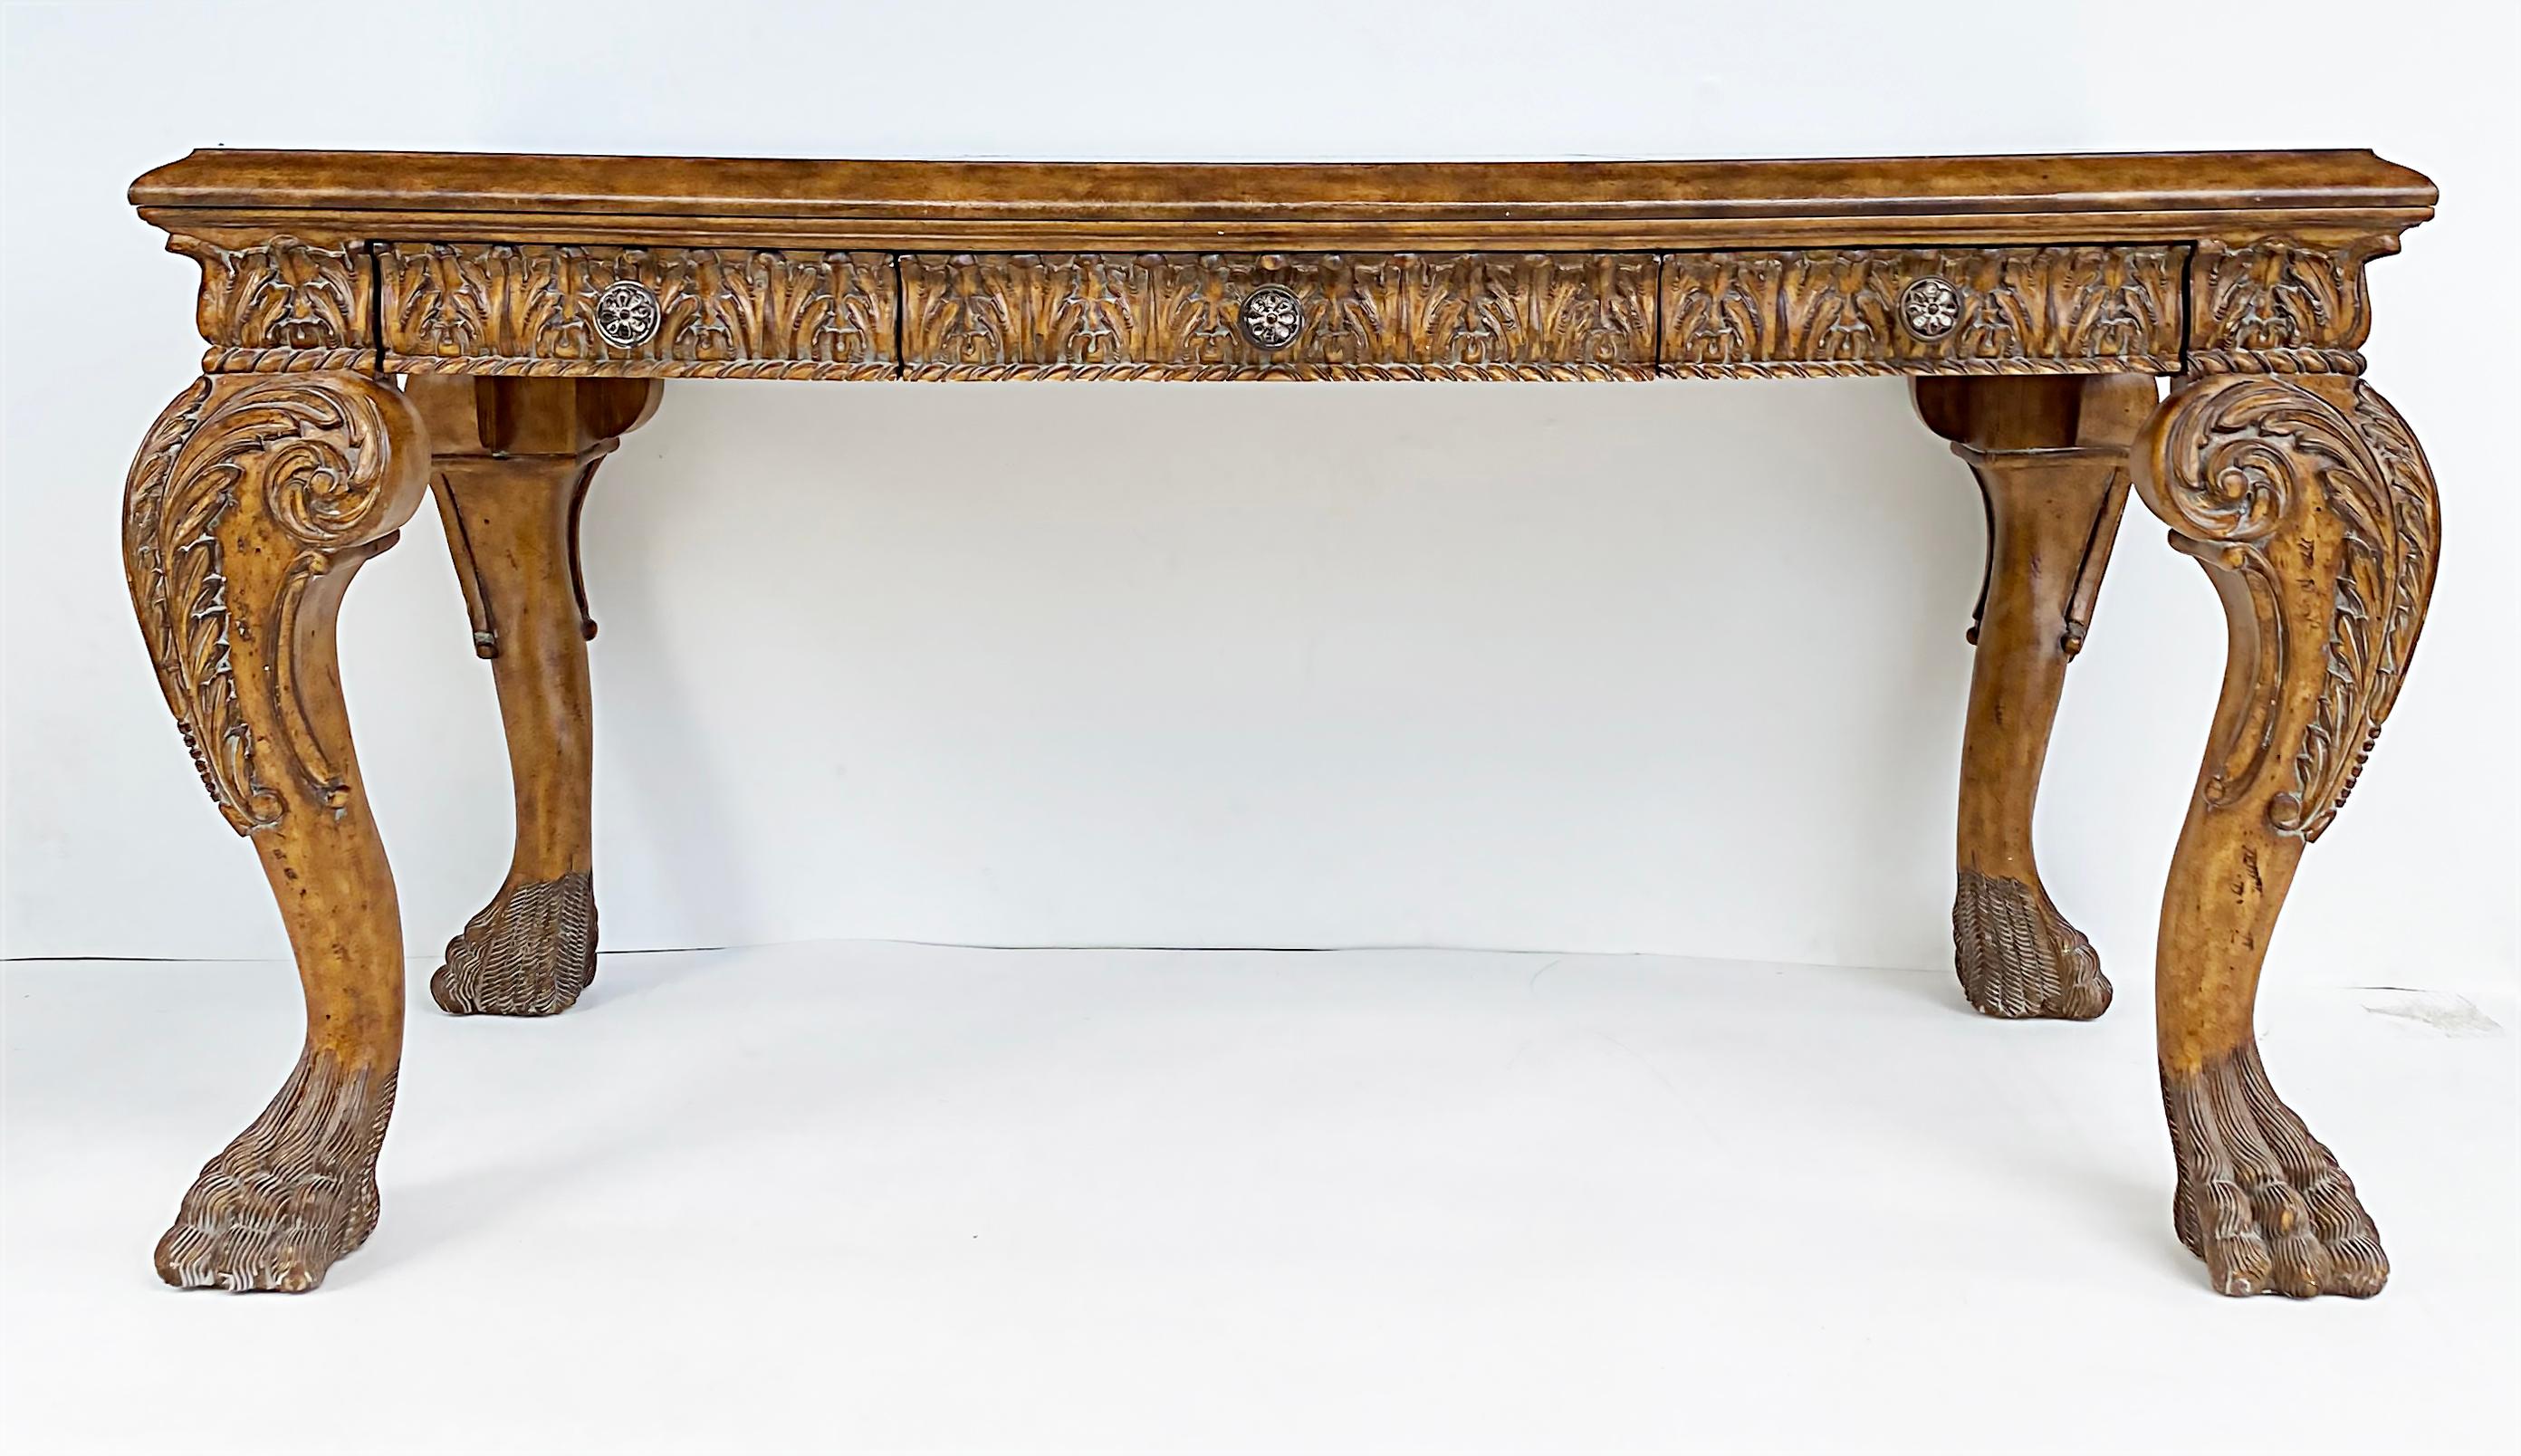 Contemporary Carved Gilt Leather Writing Desk with Hairy Paw Feet, Maitland-Smith Attributed